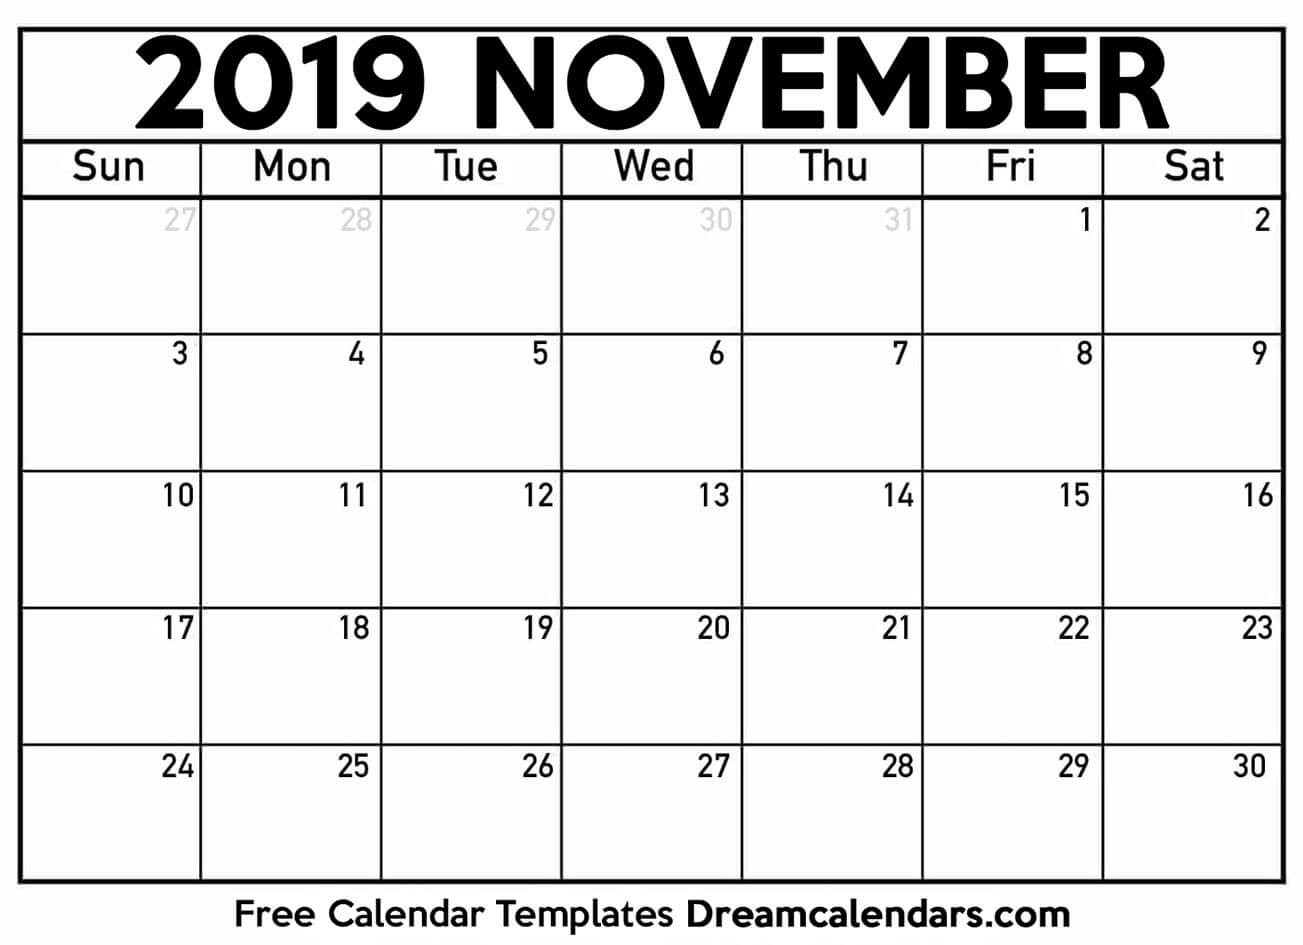 November 2019 Calendar Free Printable with Holidays and Observances